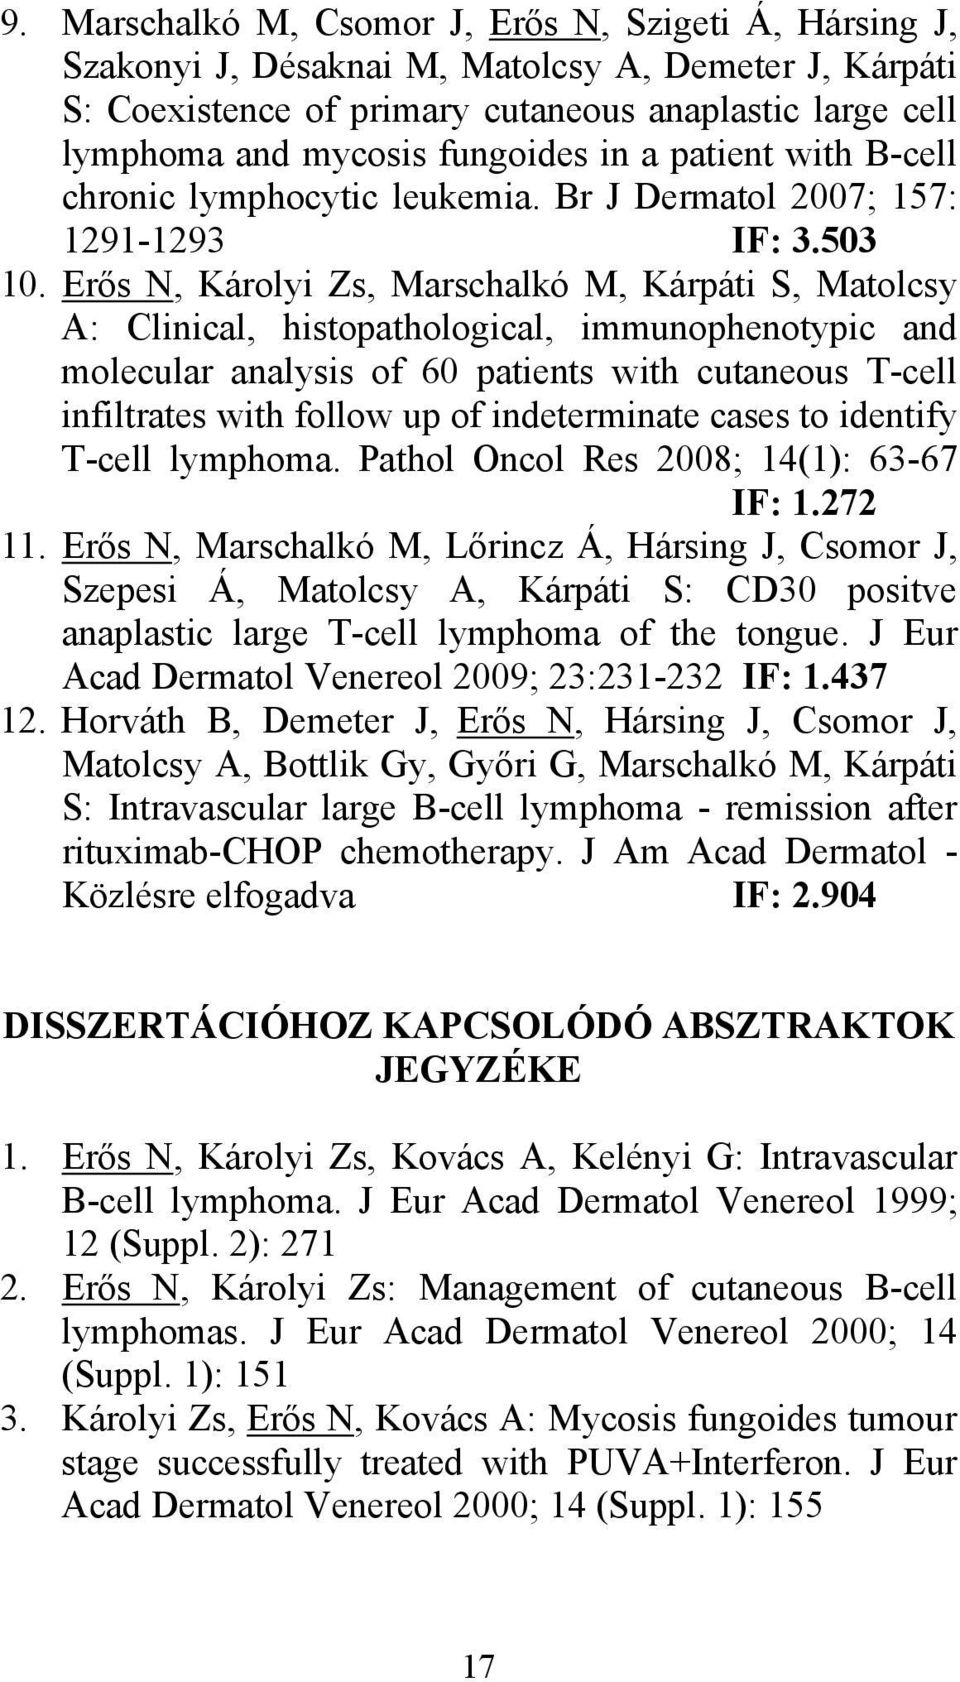 Erős N, Károlyi Zs, Marschalkó M, Kárpáti S, Matolcsy A: Clinical, histopathological, immunophenotypic and molecular analysis of 60 patients with cutaneous T-cell infiltrates with follow up of